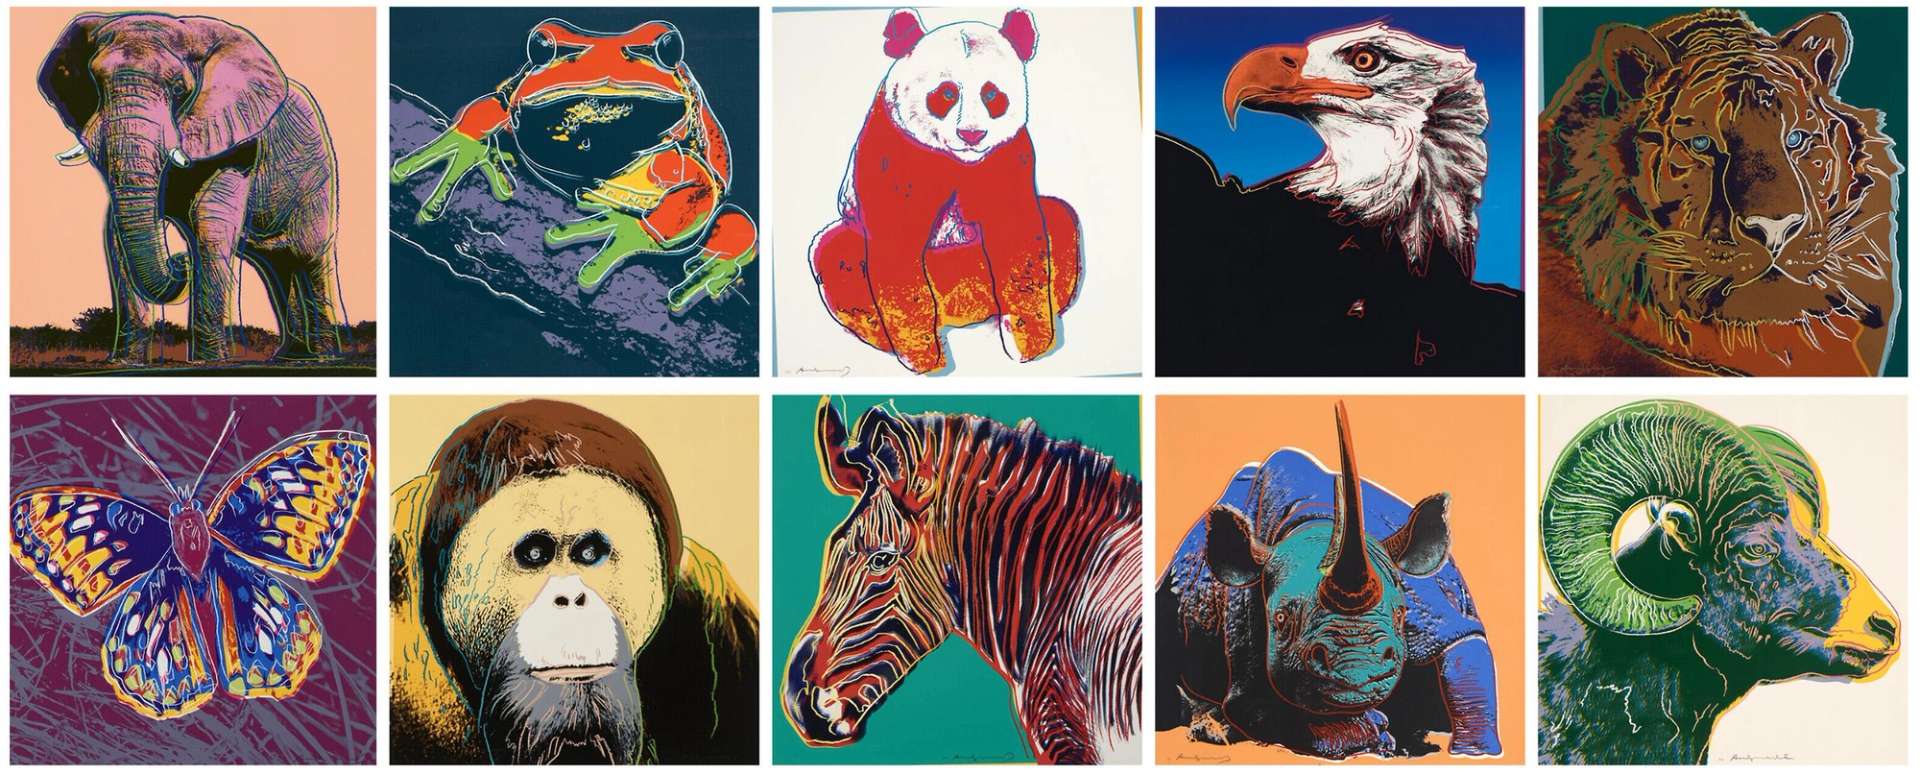 A set of 10 screenprints by Andy Warhol depicting different endangered animals in bright colours.